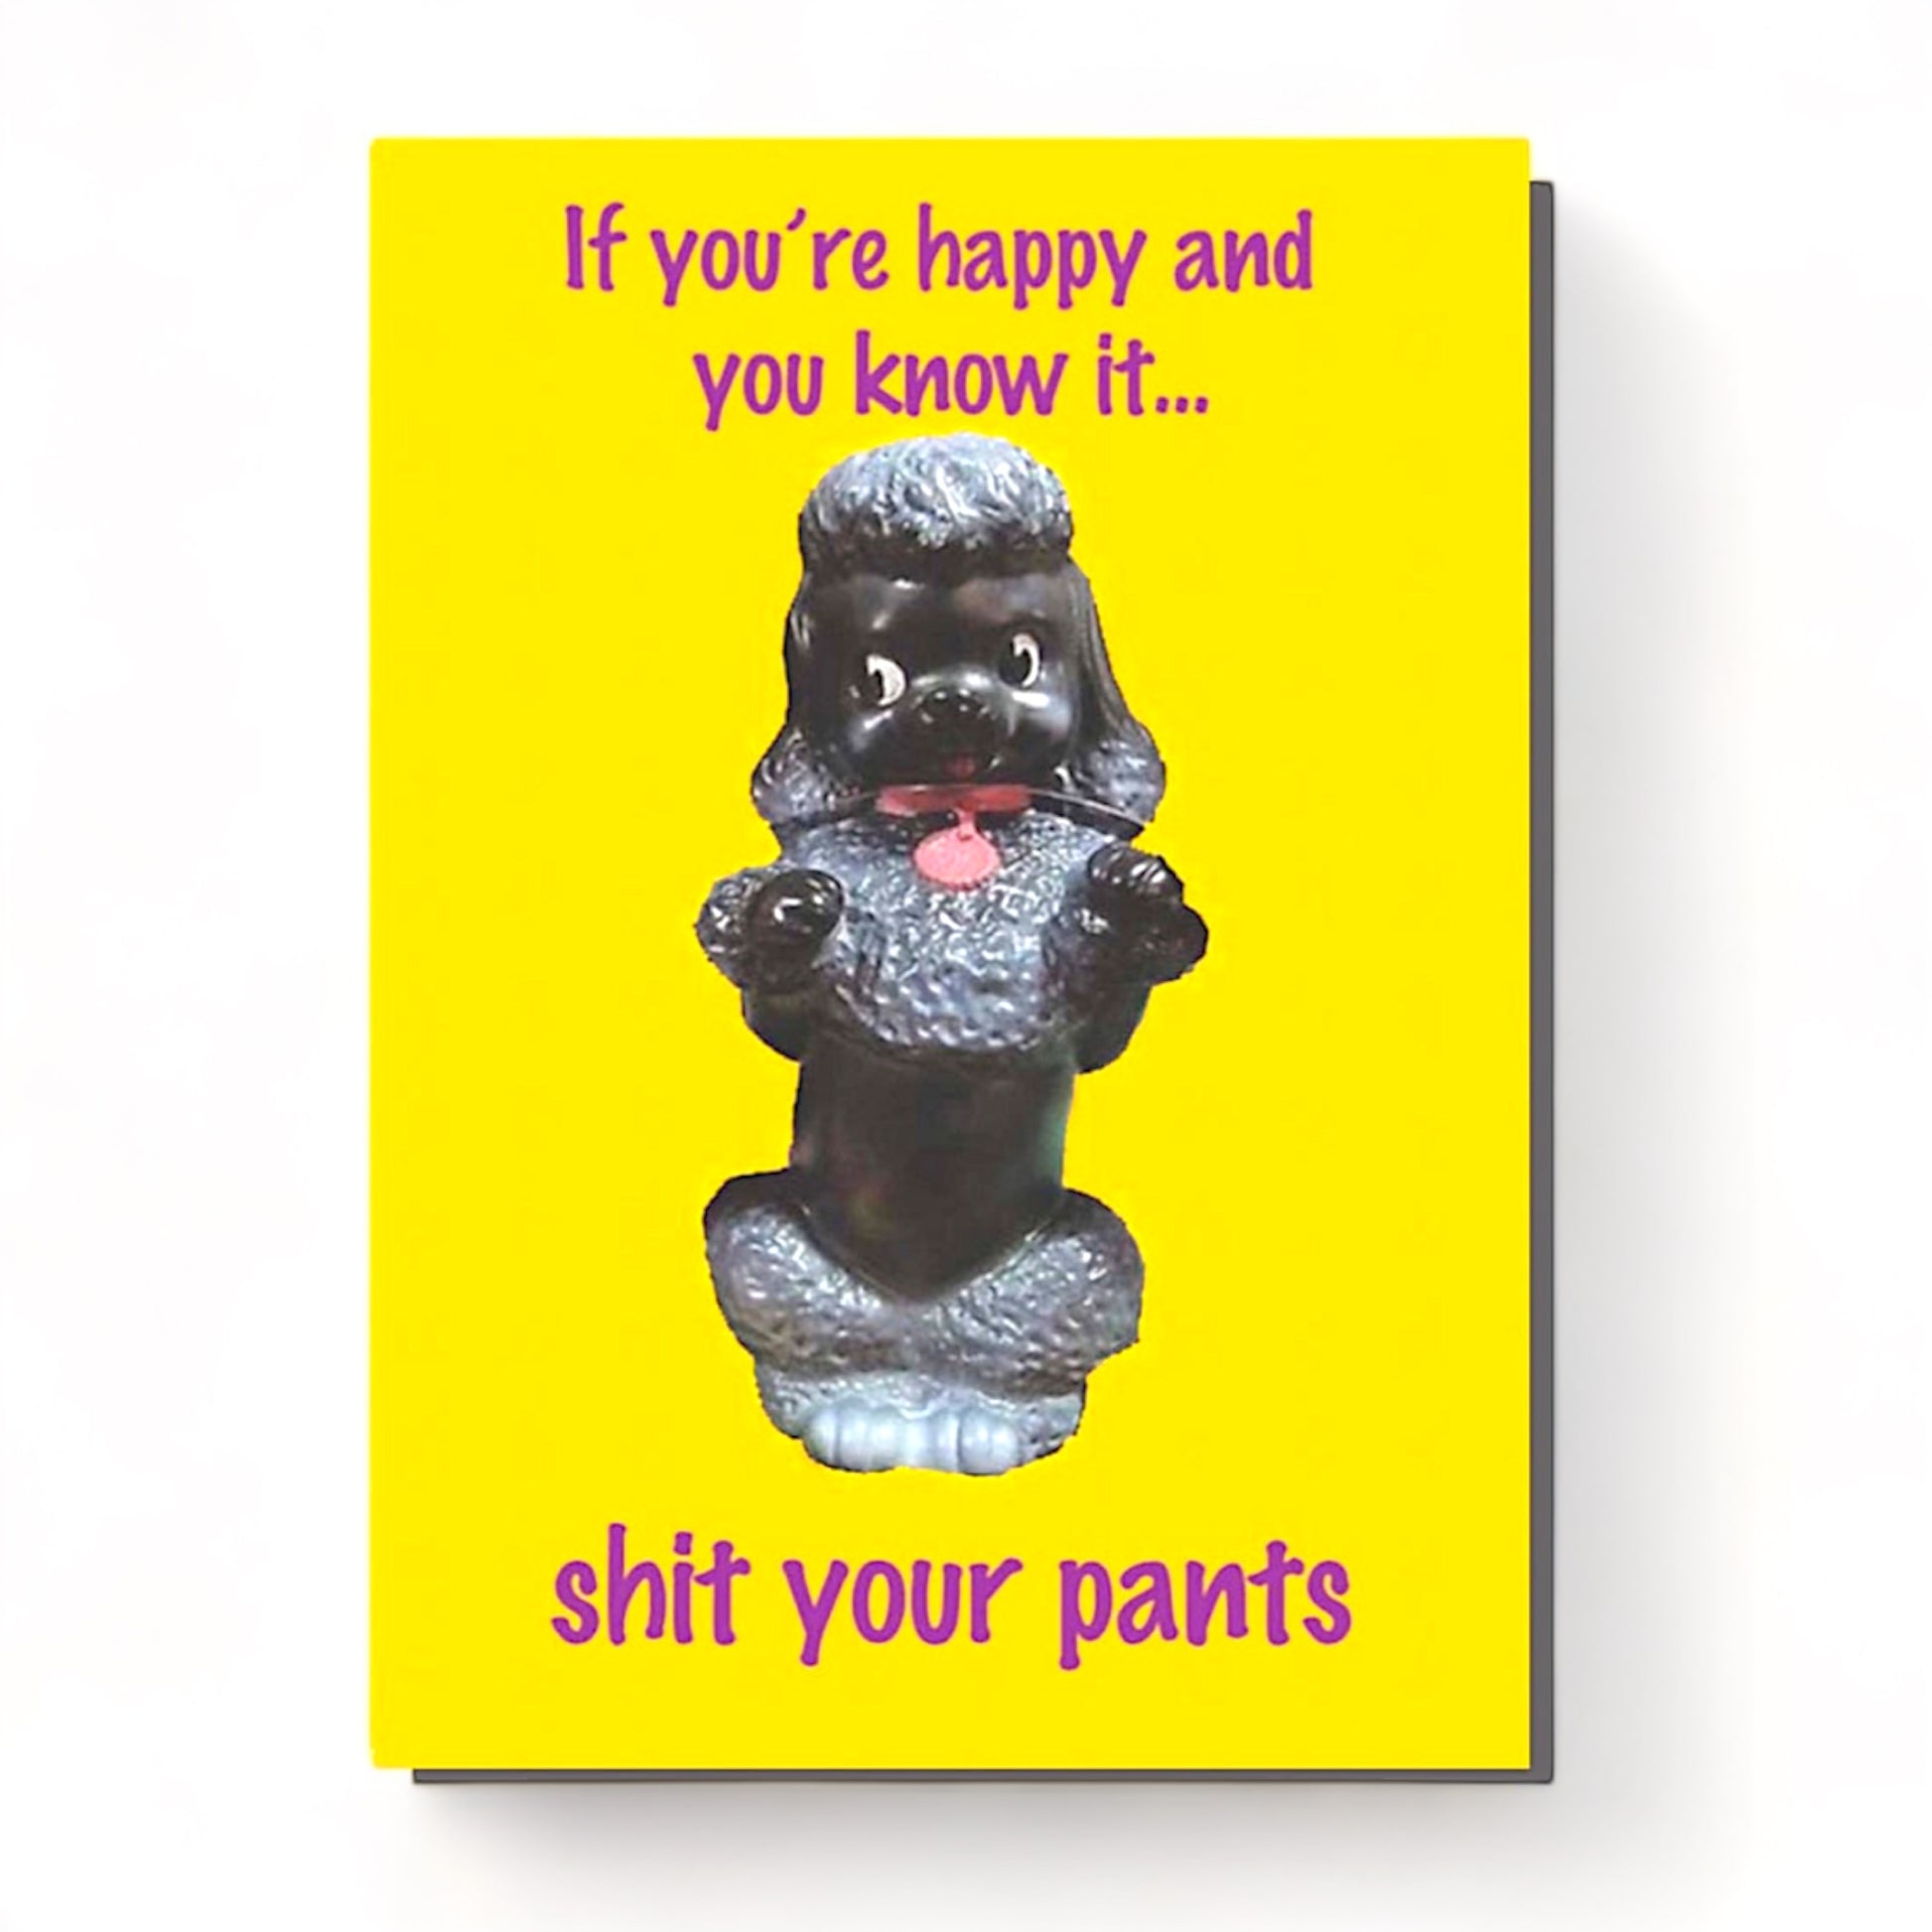 If You’re Happy and You Know It - Greeting Card - Hella Kitsch